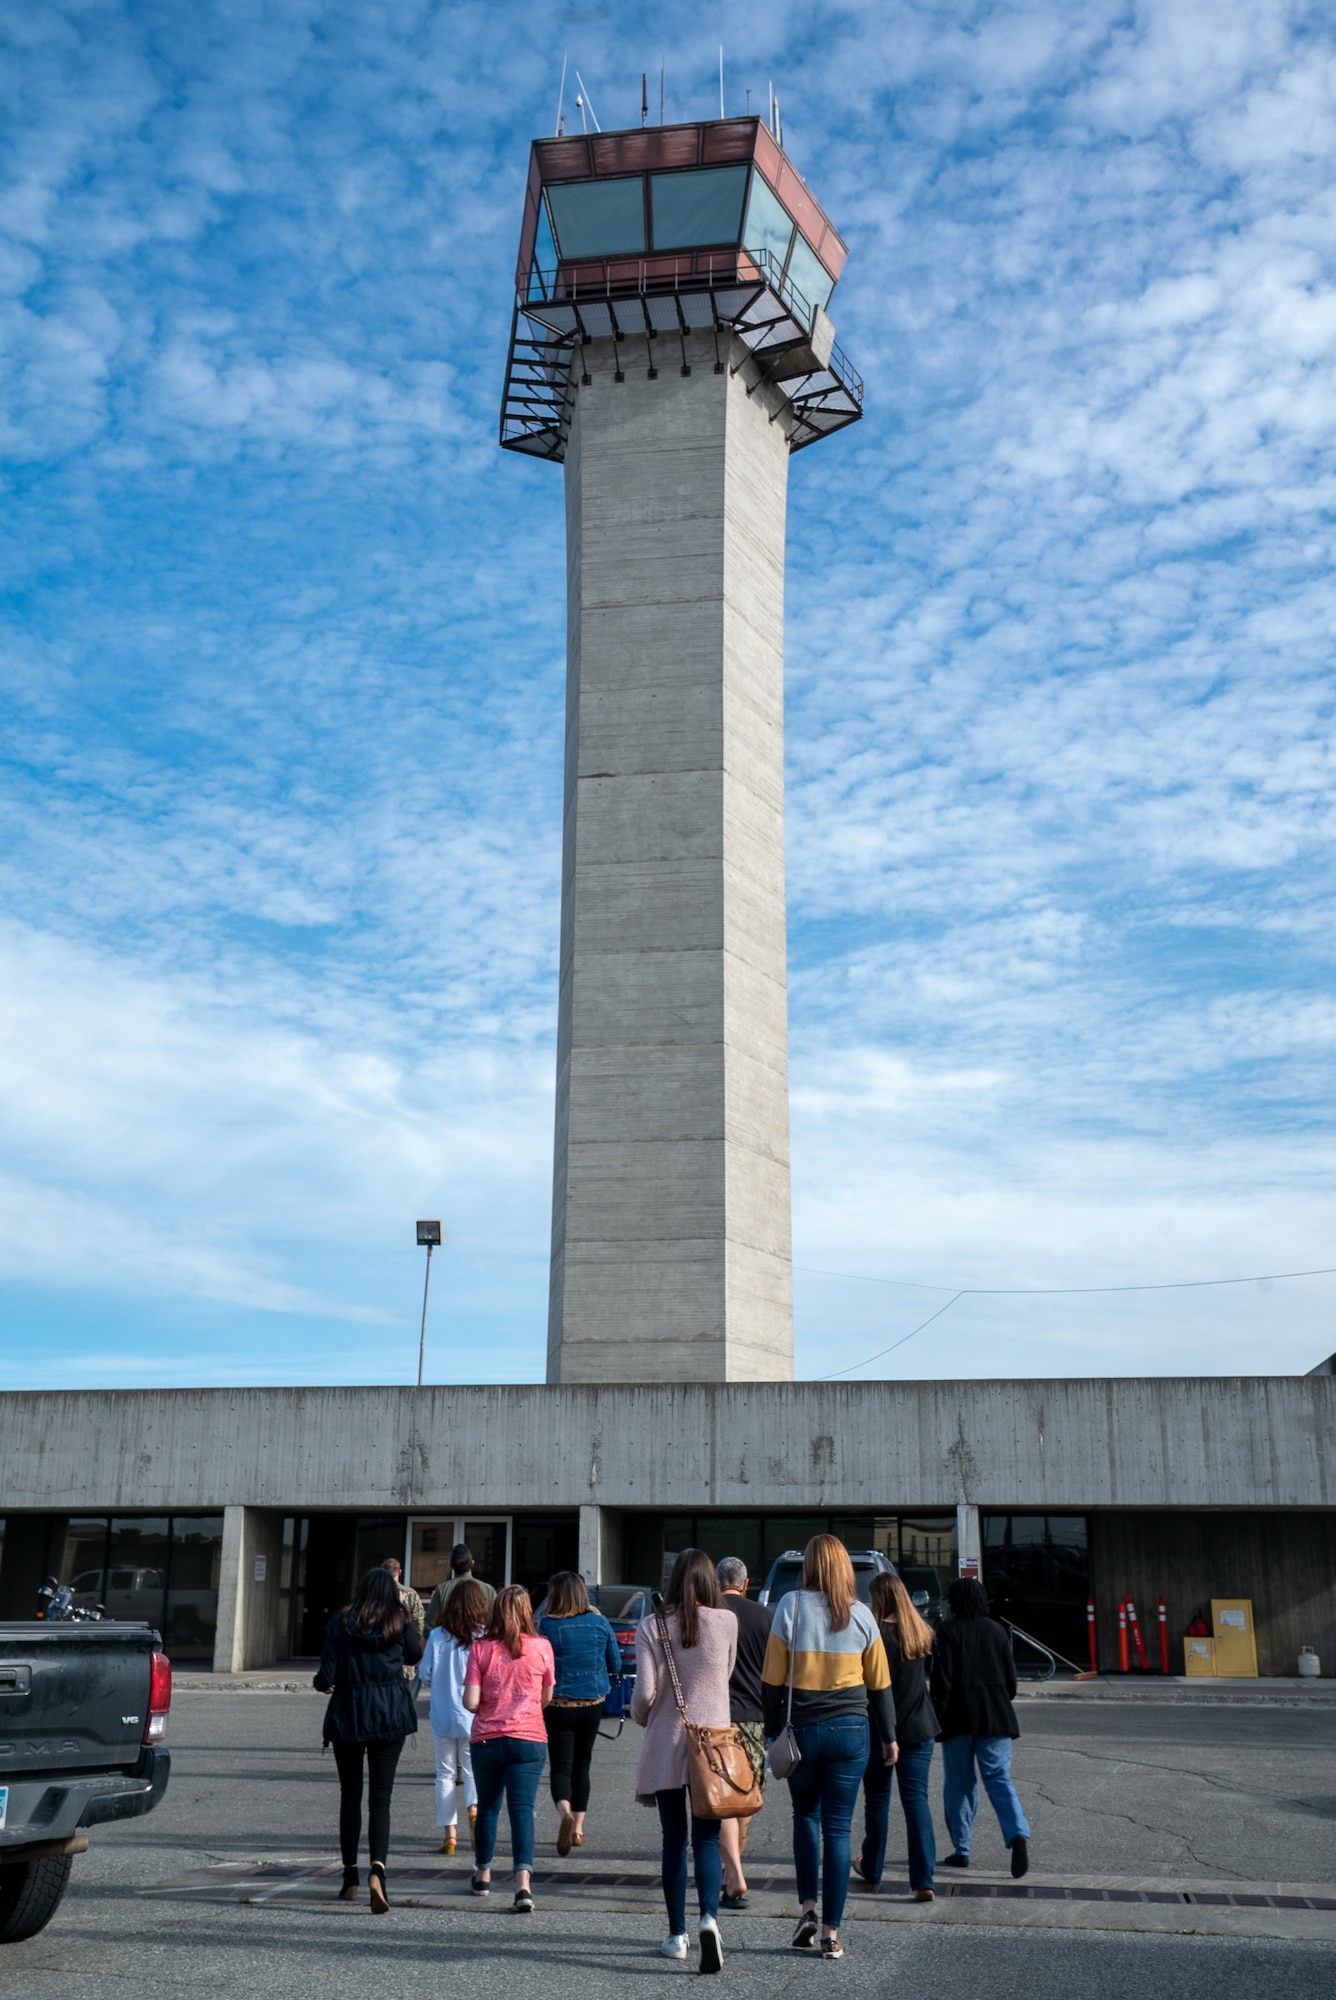 Spouses from the 3rd Wing approach the Air Traffic Control tower during an immersion tour at Joint Base Elmendorf-Richardson, Alaska.